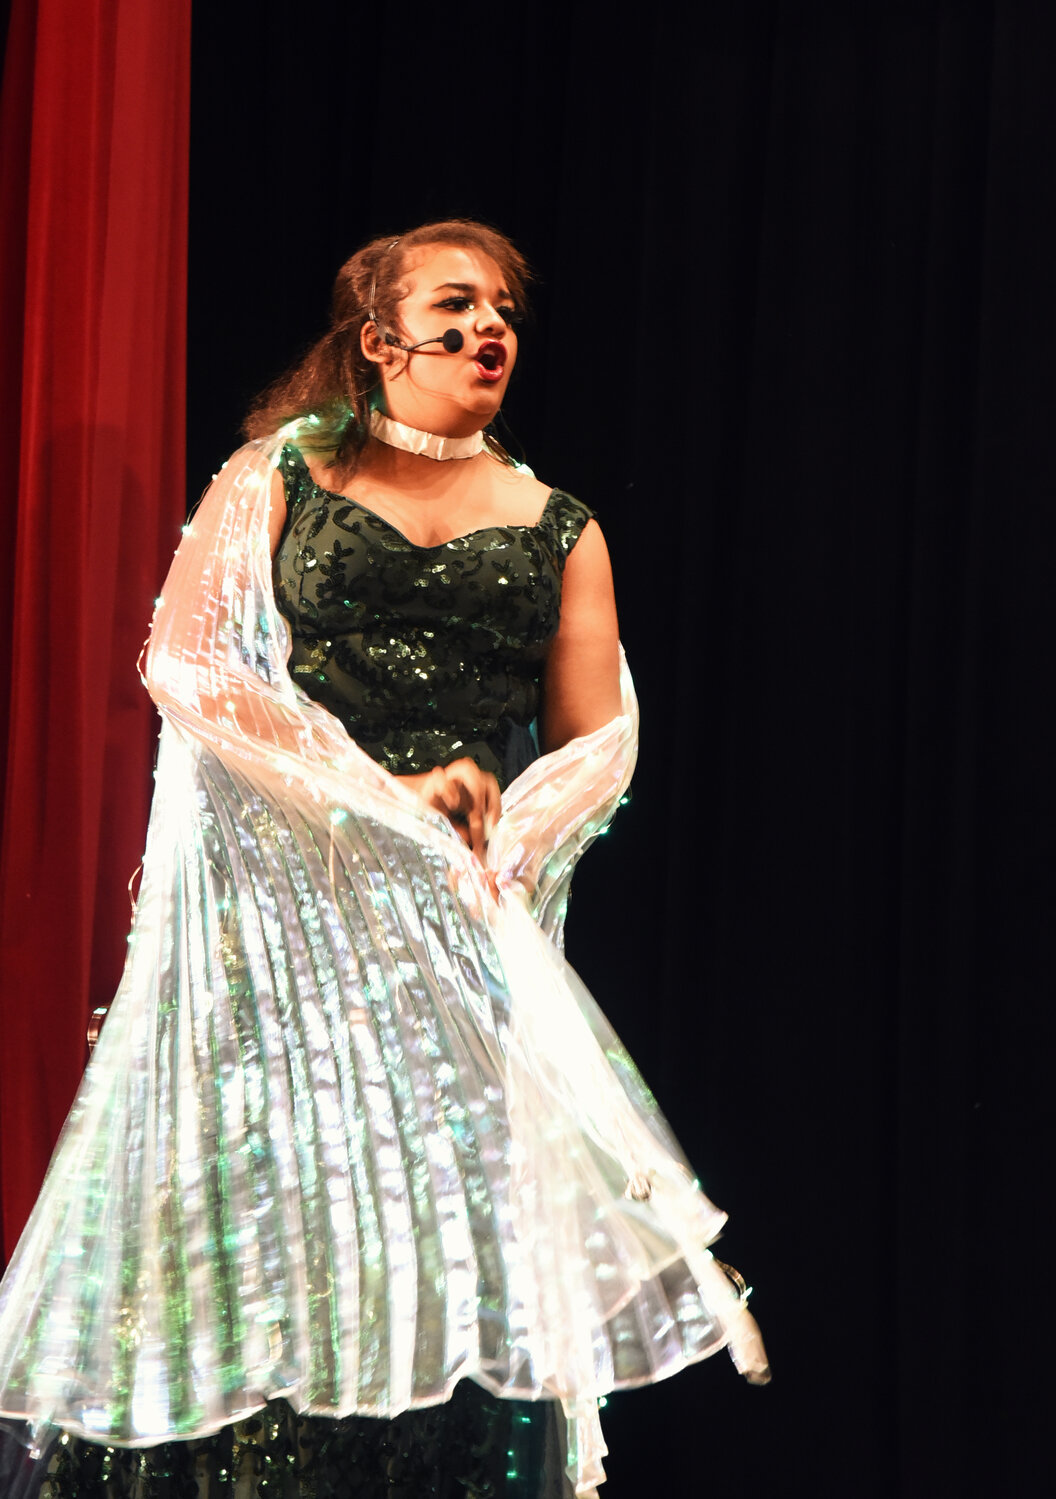 Taytum Cole-Rogans is no stranger to the stage and she proved that with her portrayal as the Dragon in Frederick Middle School’s production of Shrek the Musical, Jr.